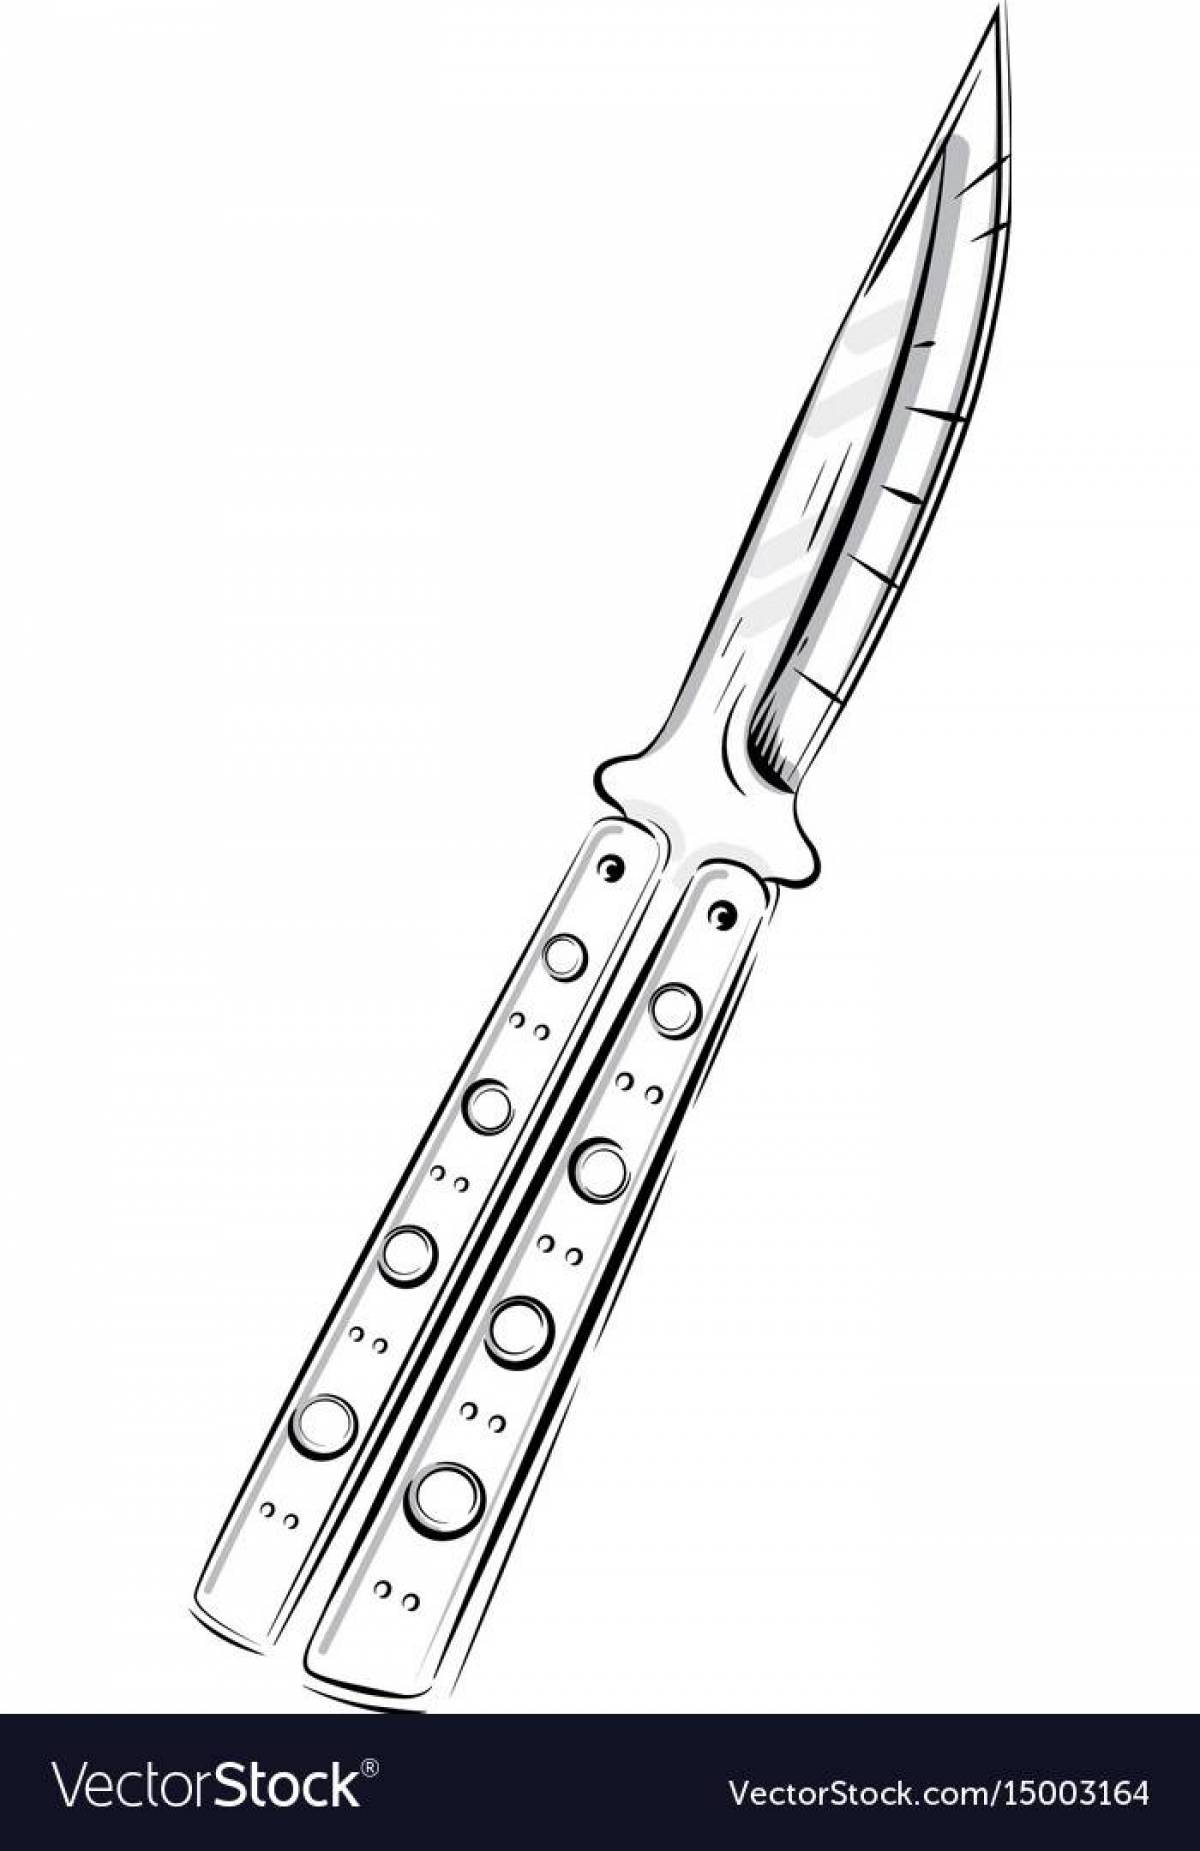 Stylish butterfly knife coloring book